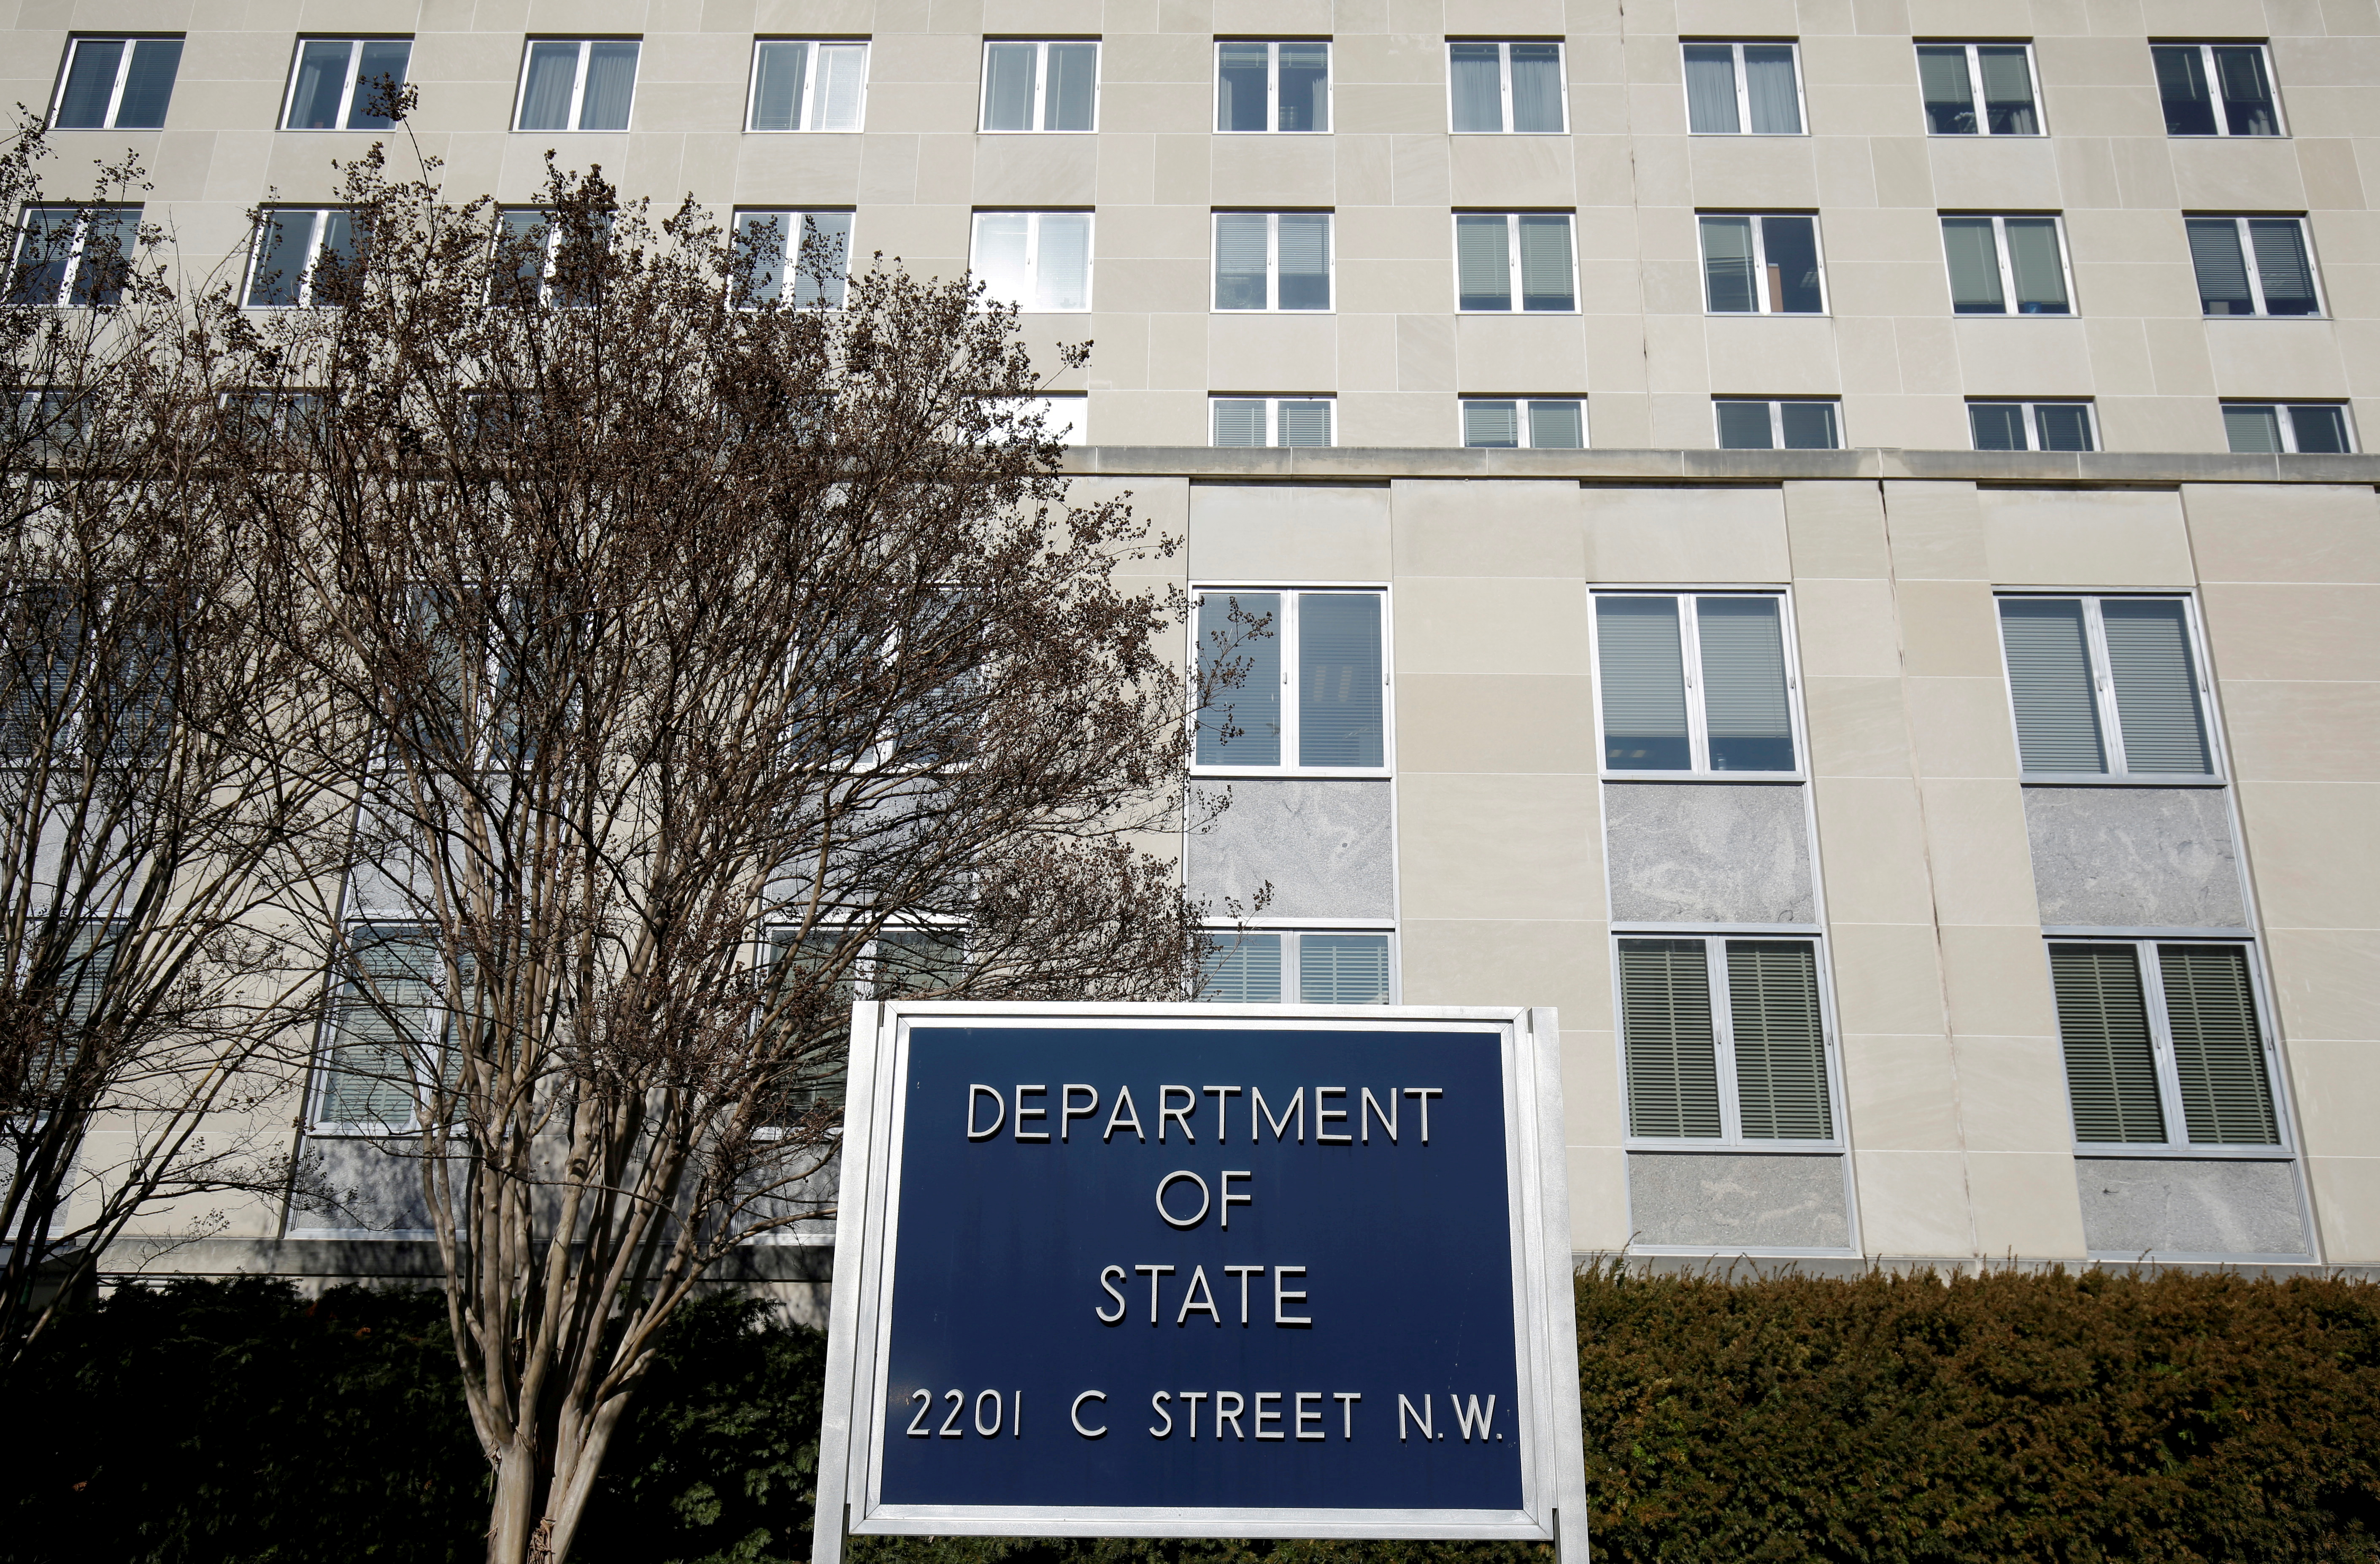 The State Department Building is pictured in Washington